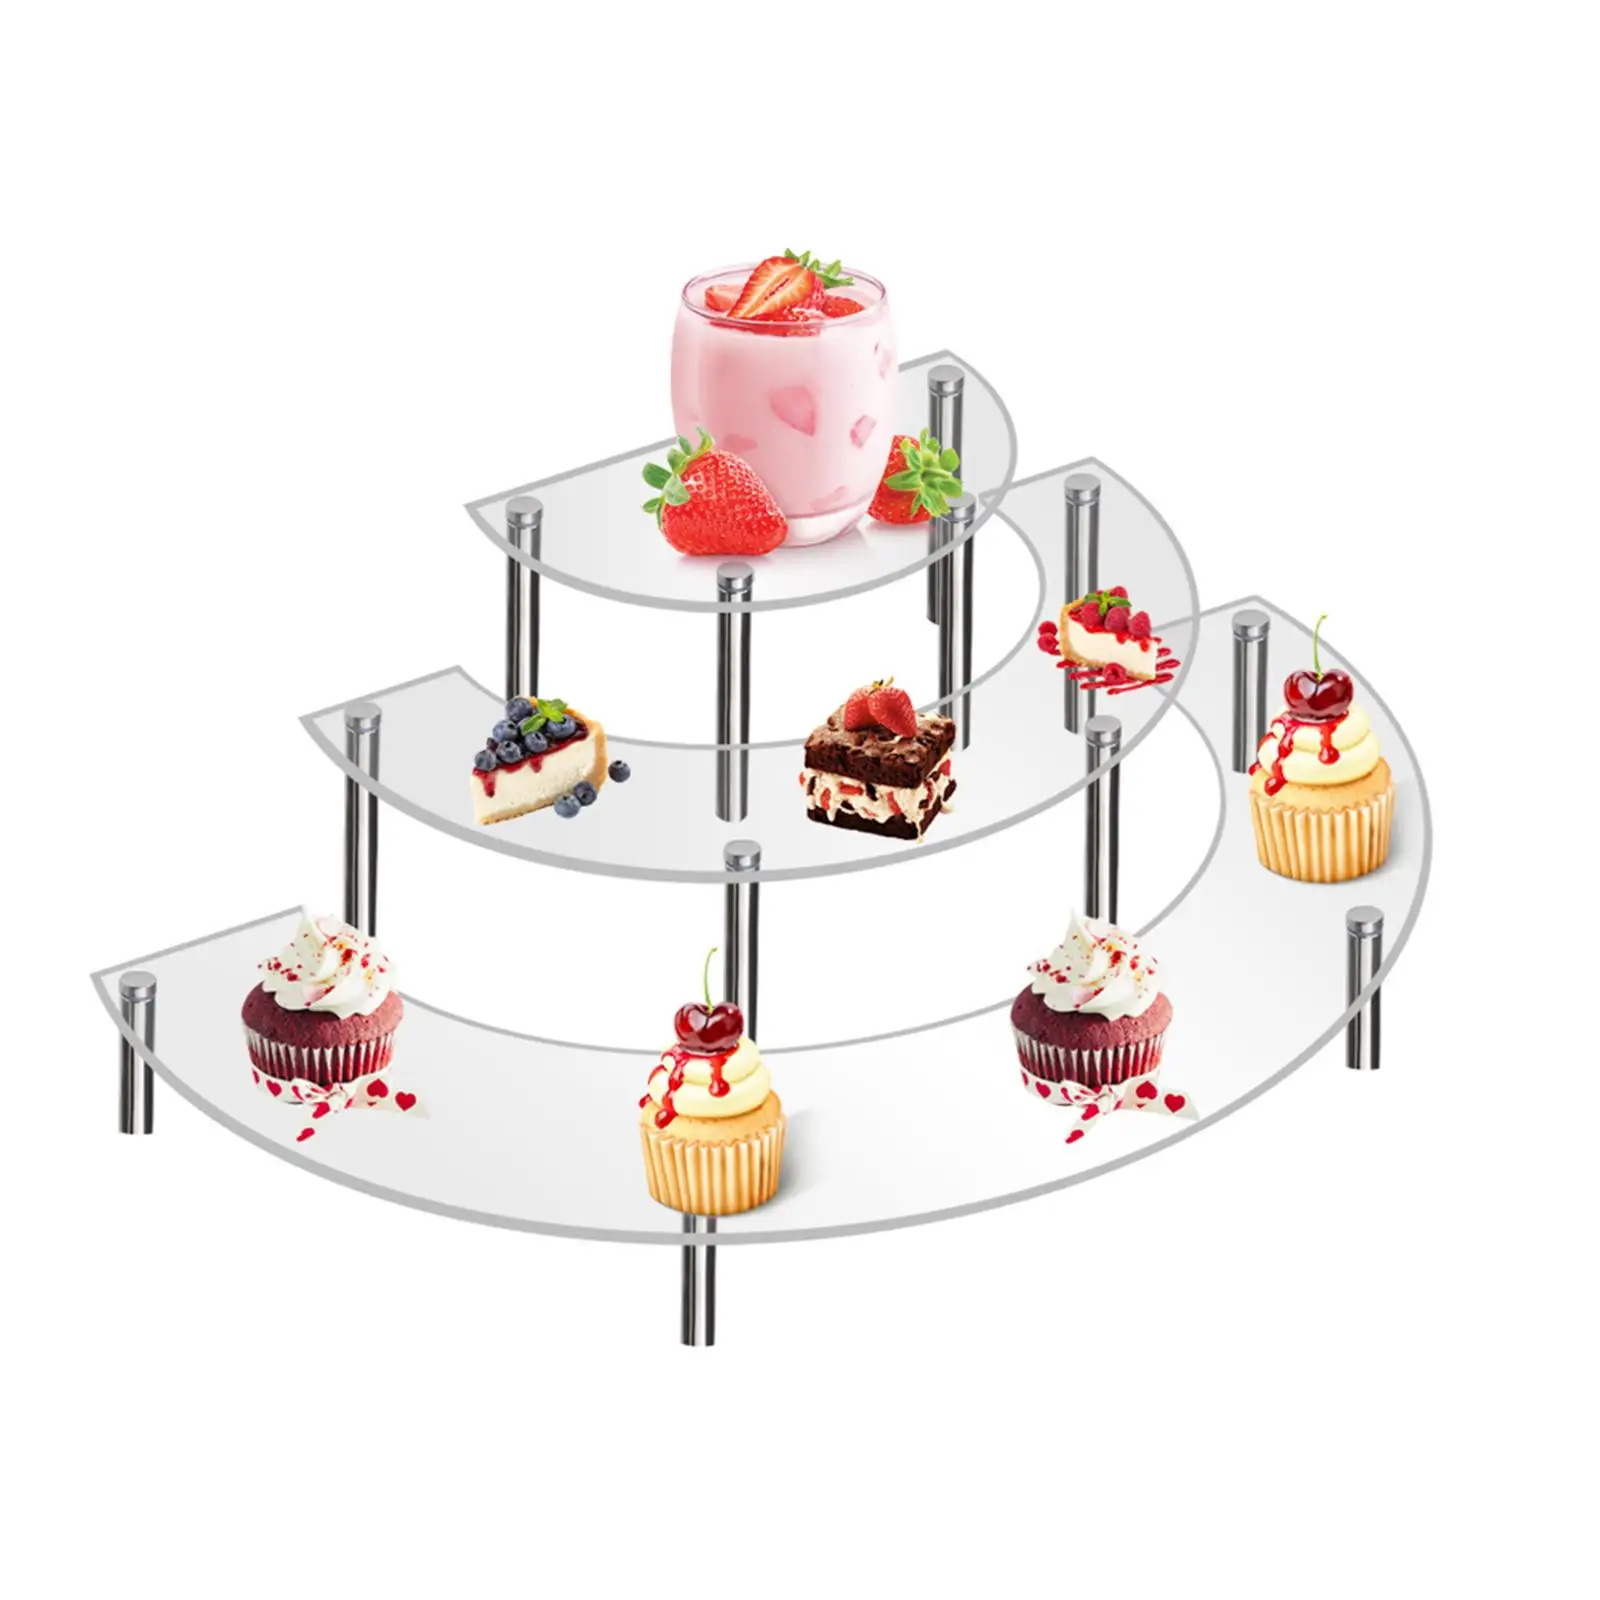 3 Tier Acrylic Half Moon Dessert Cupcake Display Stand for Appetizers Collection Figures Pastries Wedding Home